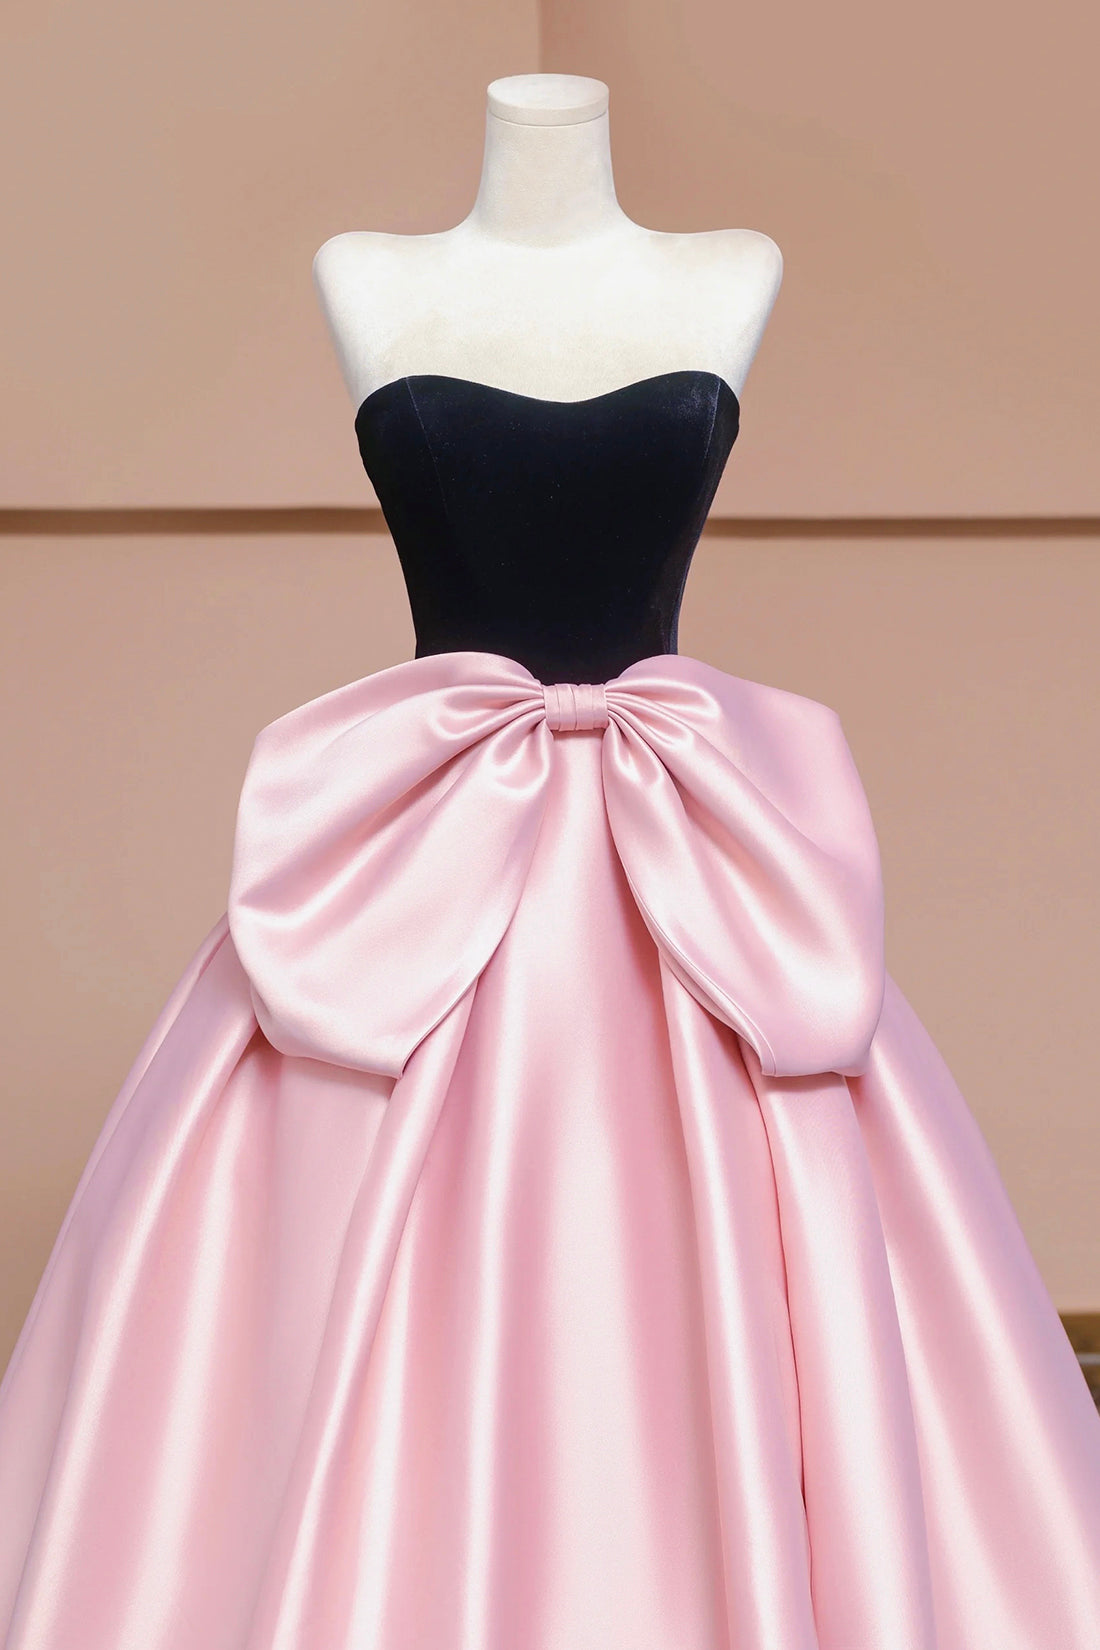 Black Velvet and Pink Satin Long Prom Dress with Bow, Beautiful A-Line Strapless Formal Party Dress